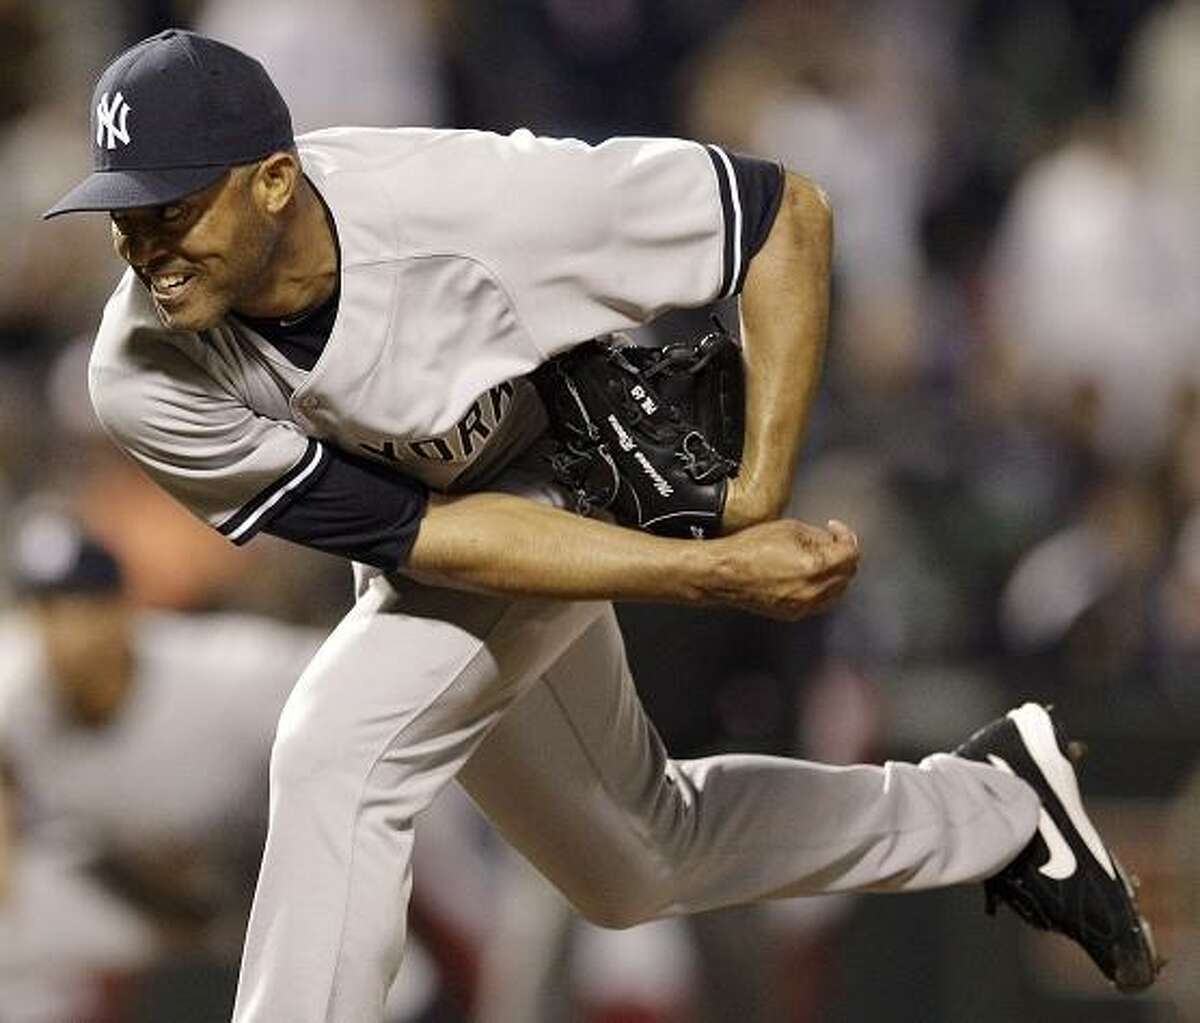 New York Yankees relief pitcher Mariano Rivera follows through on a pitch against the Baltimore Orioles in the twelfth inning of a baseball game in Baltimore, Tuesday, April 10, 2012. New York won 5-4. (AP Photo/Patrick Semansky)